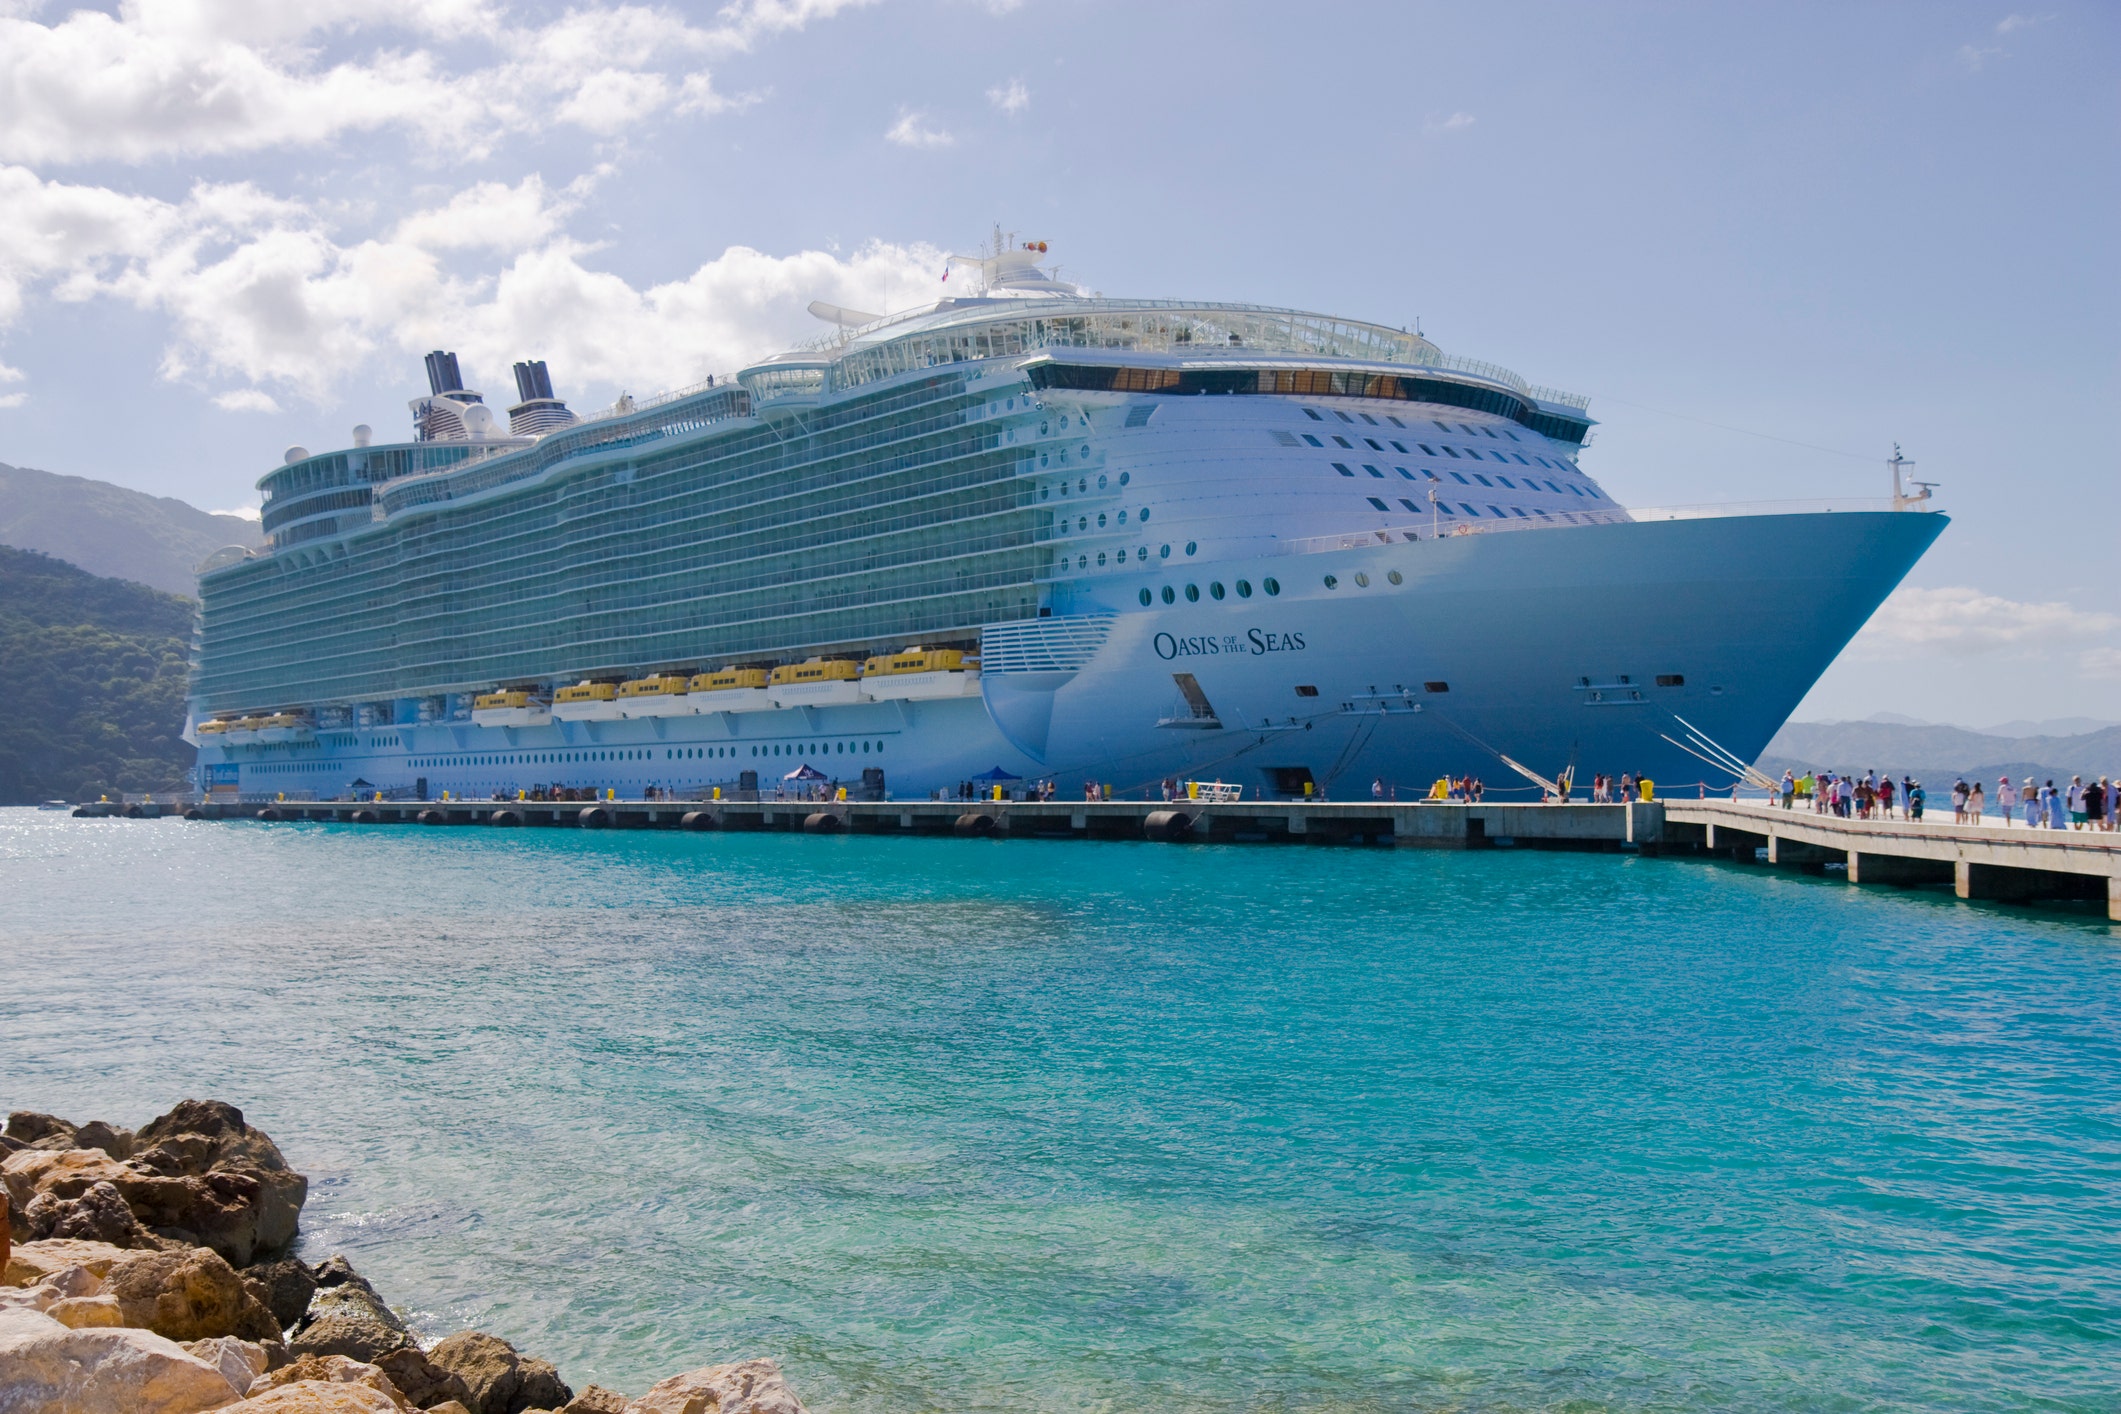 Royal Caribbean expects all passengers to be vaccinated, submits test cruise plan to CDC